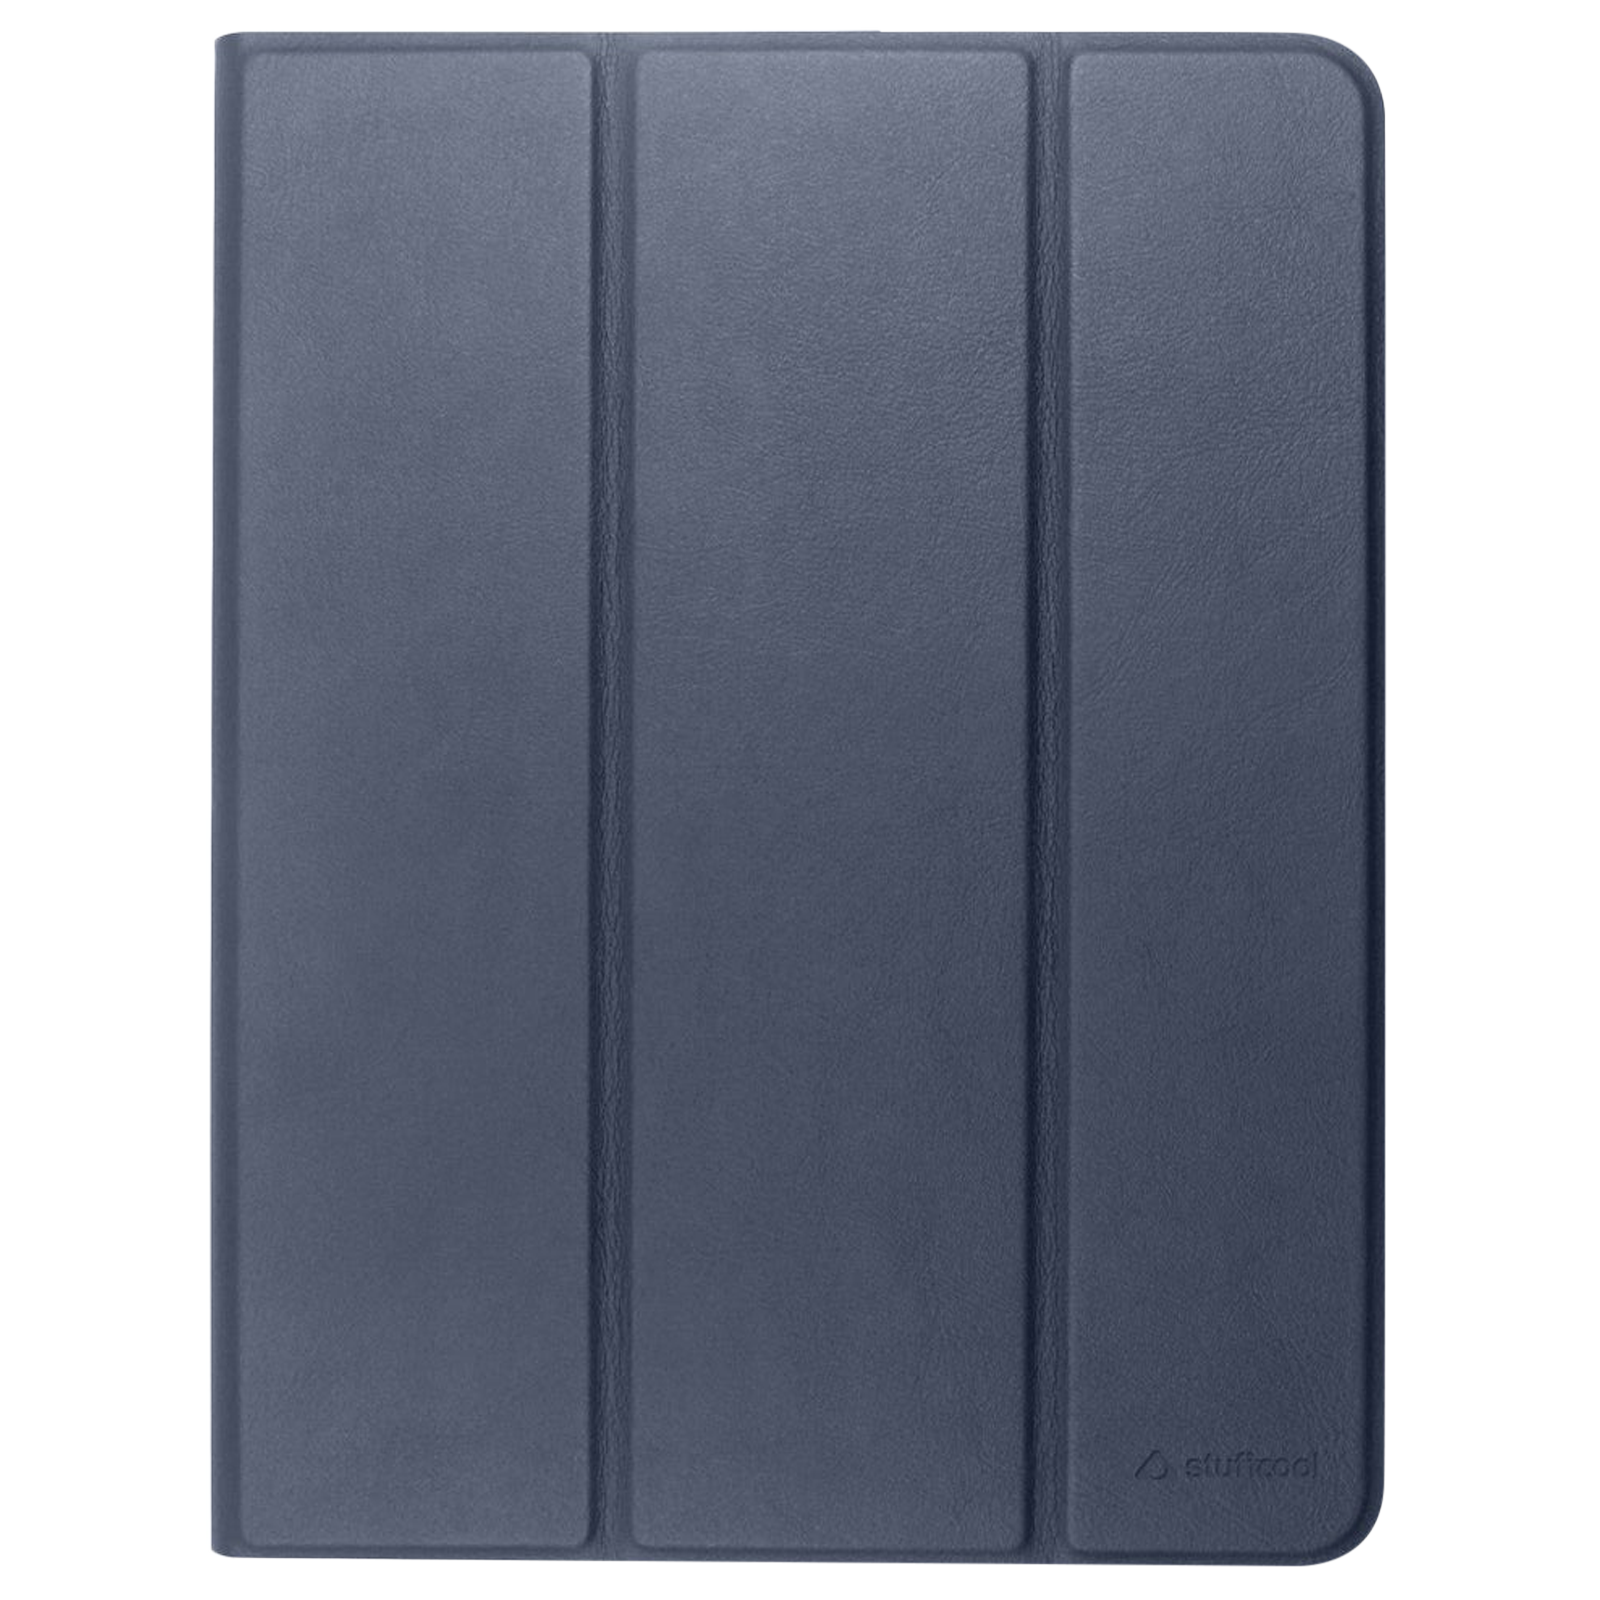 Stuffcool Flex Faux Leather Flip Cover for Apple iPad Mini 8.3 Inch (6th Gen) (Built-in Pencil Holder, Navy Blue)